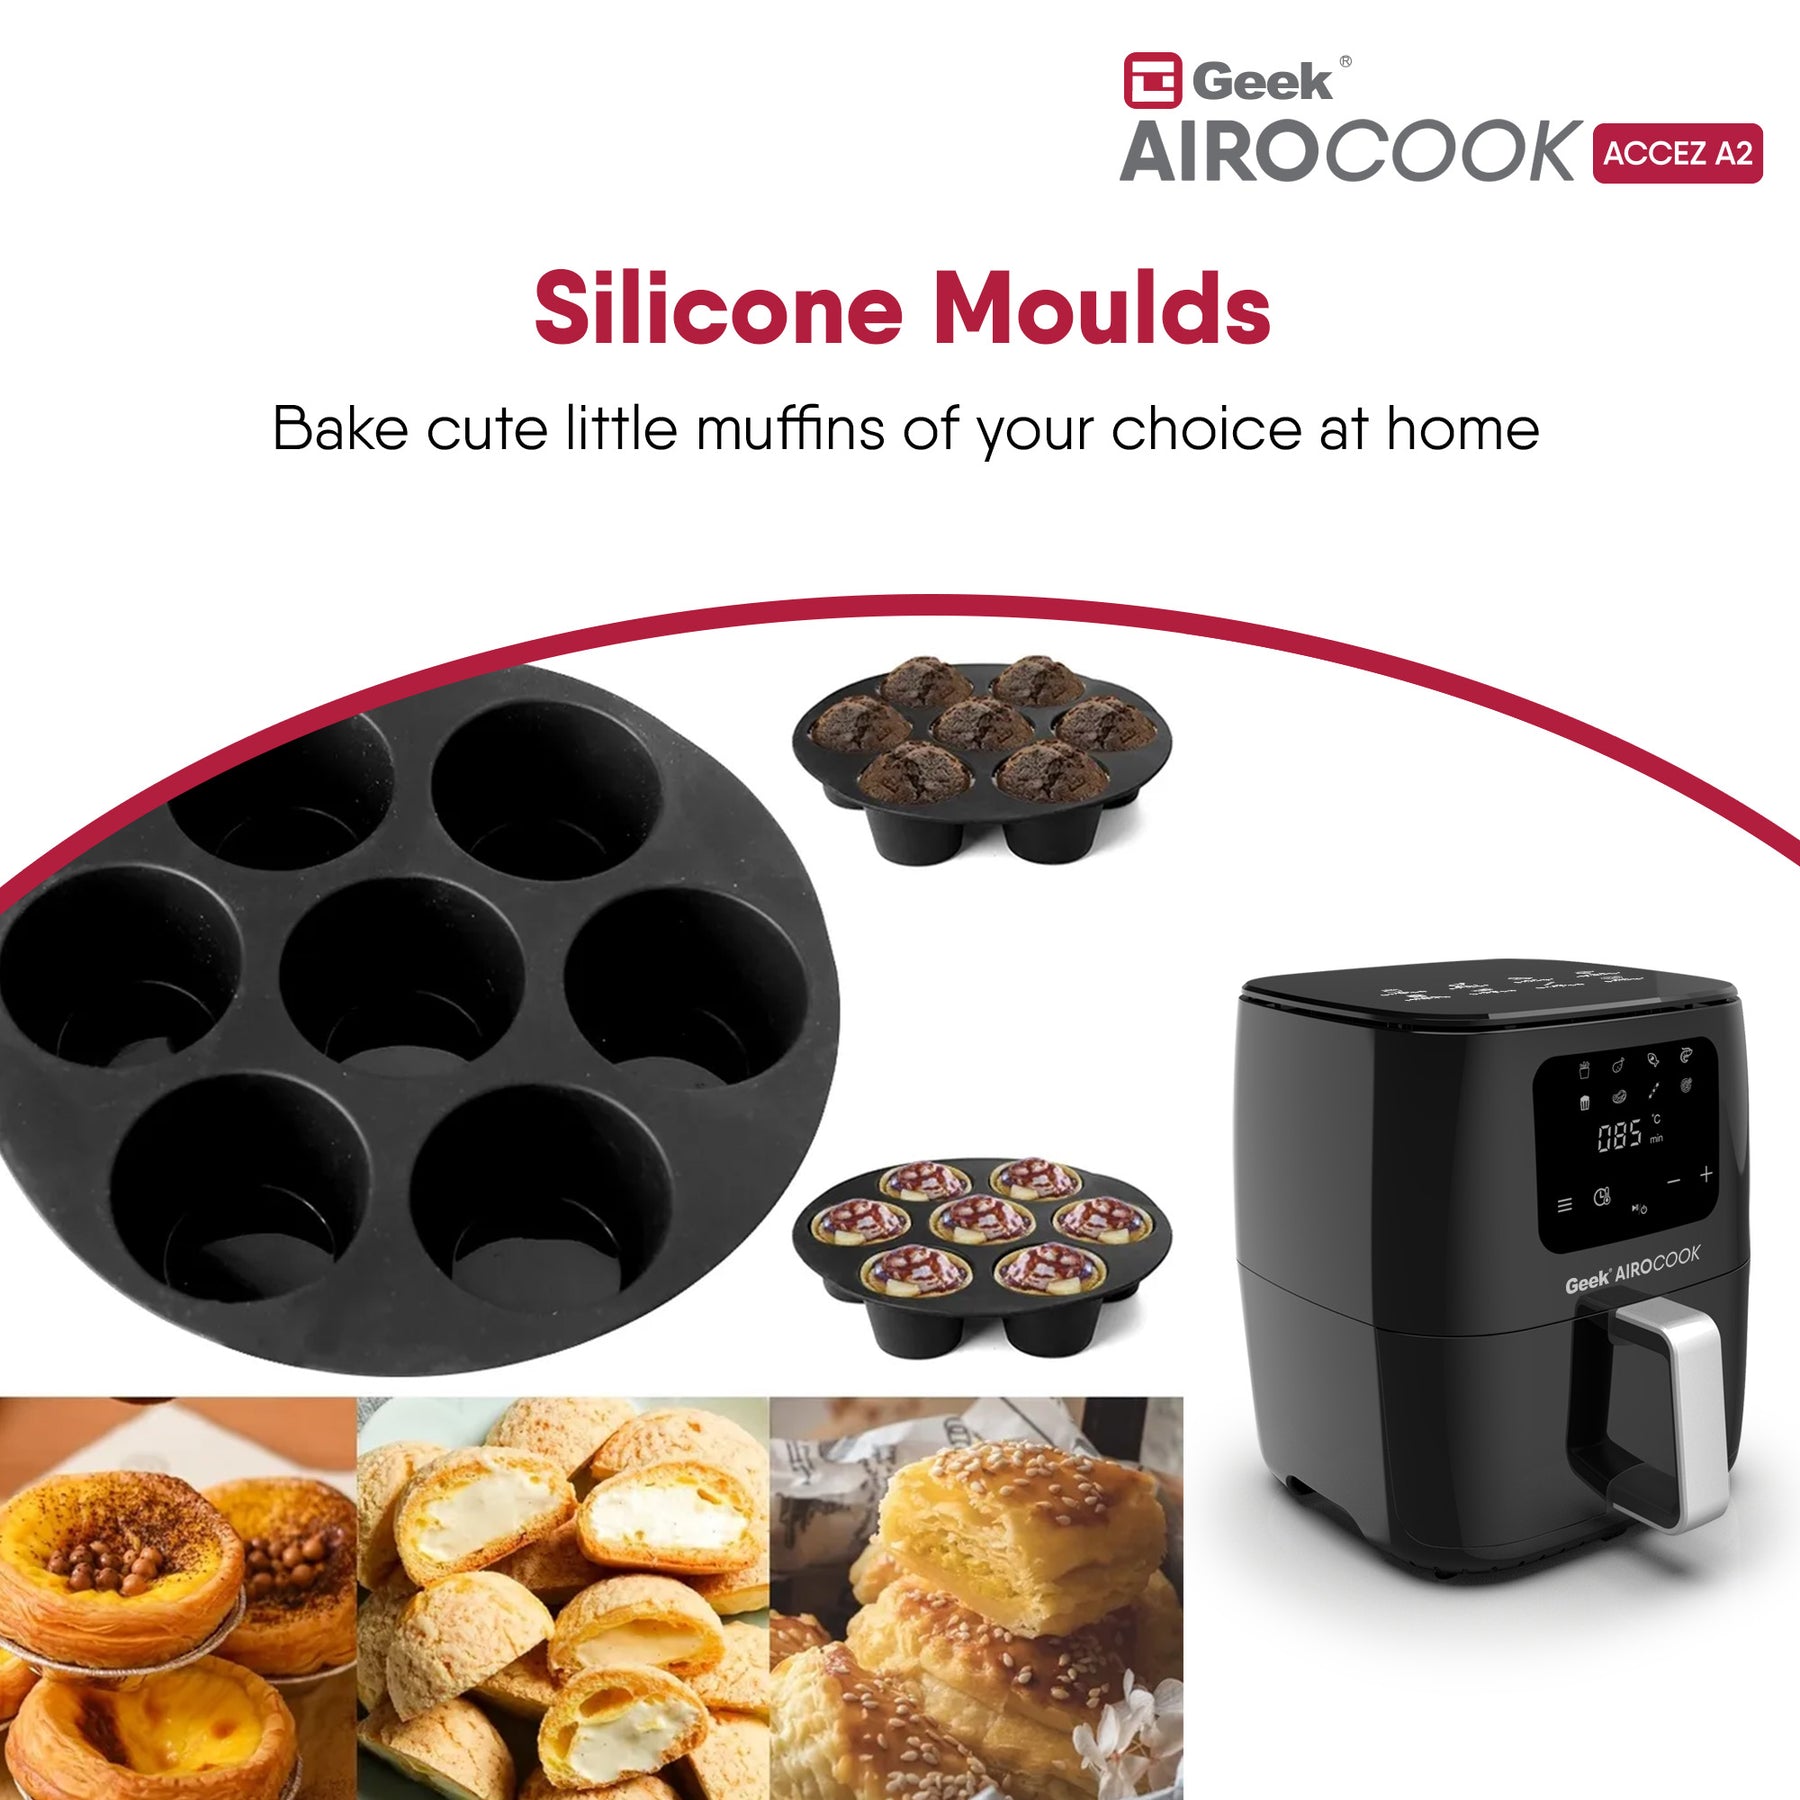 geek-airocook-air-fryer-oven-spare-accessories-compatible-for-all-air-fryer-oven-brands